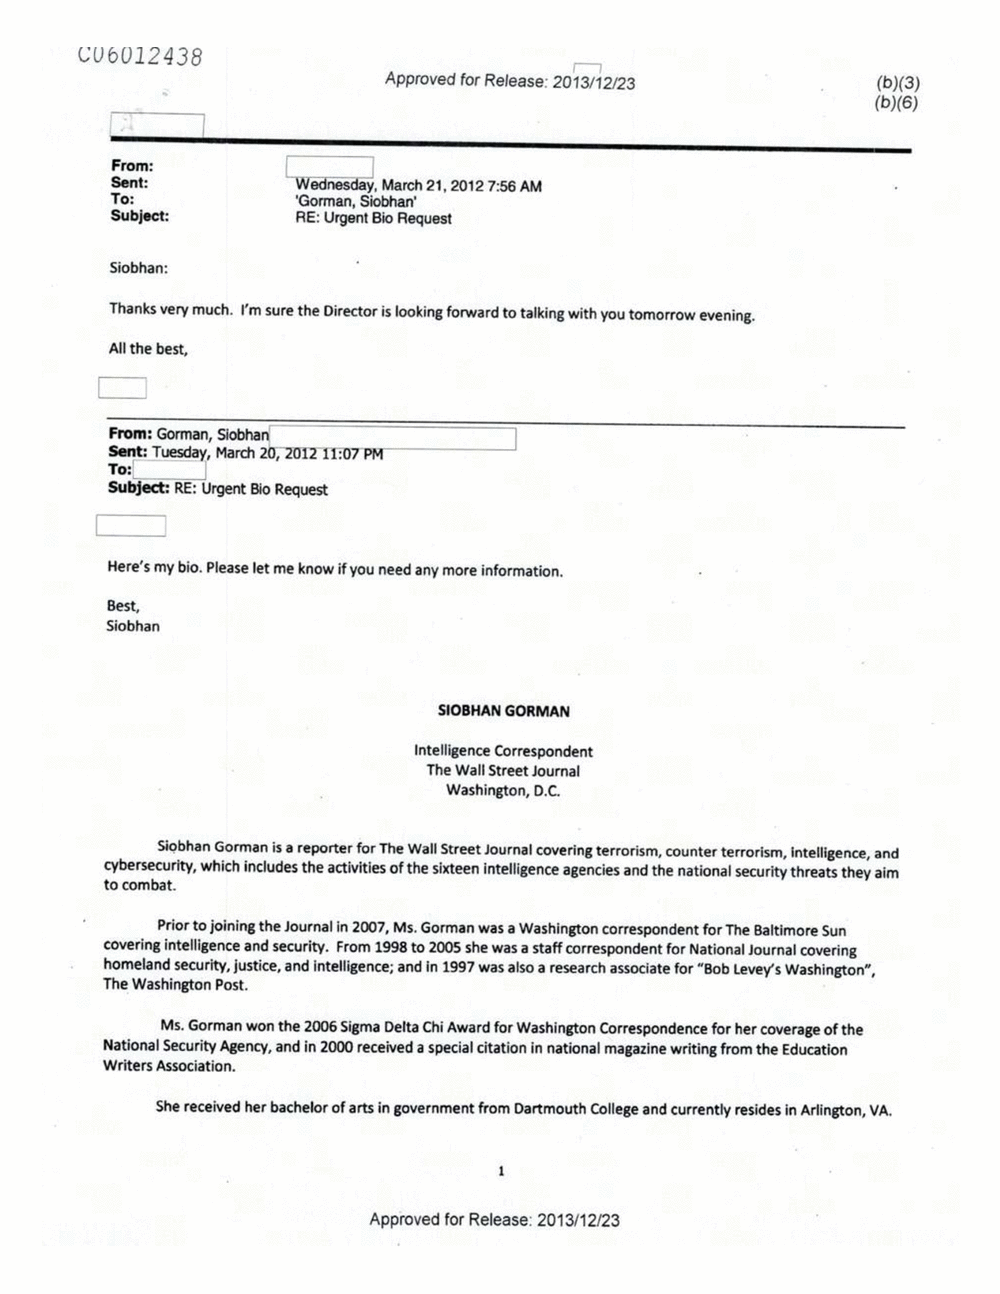 Page 20 from Email Correspondence Between Reporters and CIA Flacks